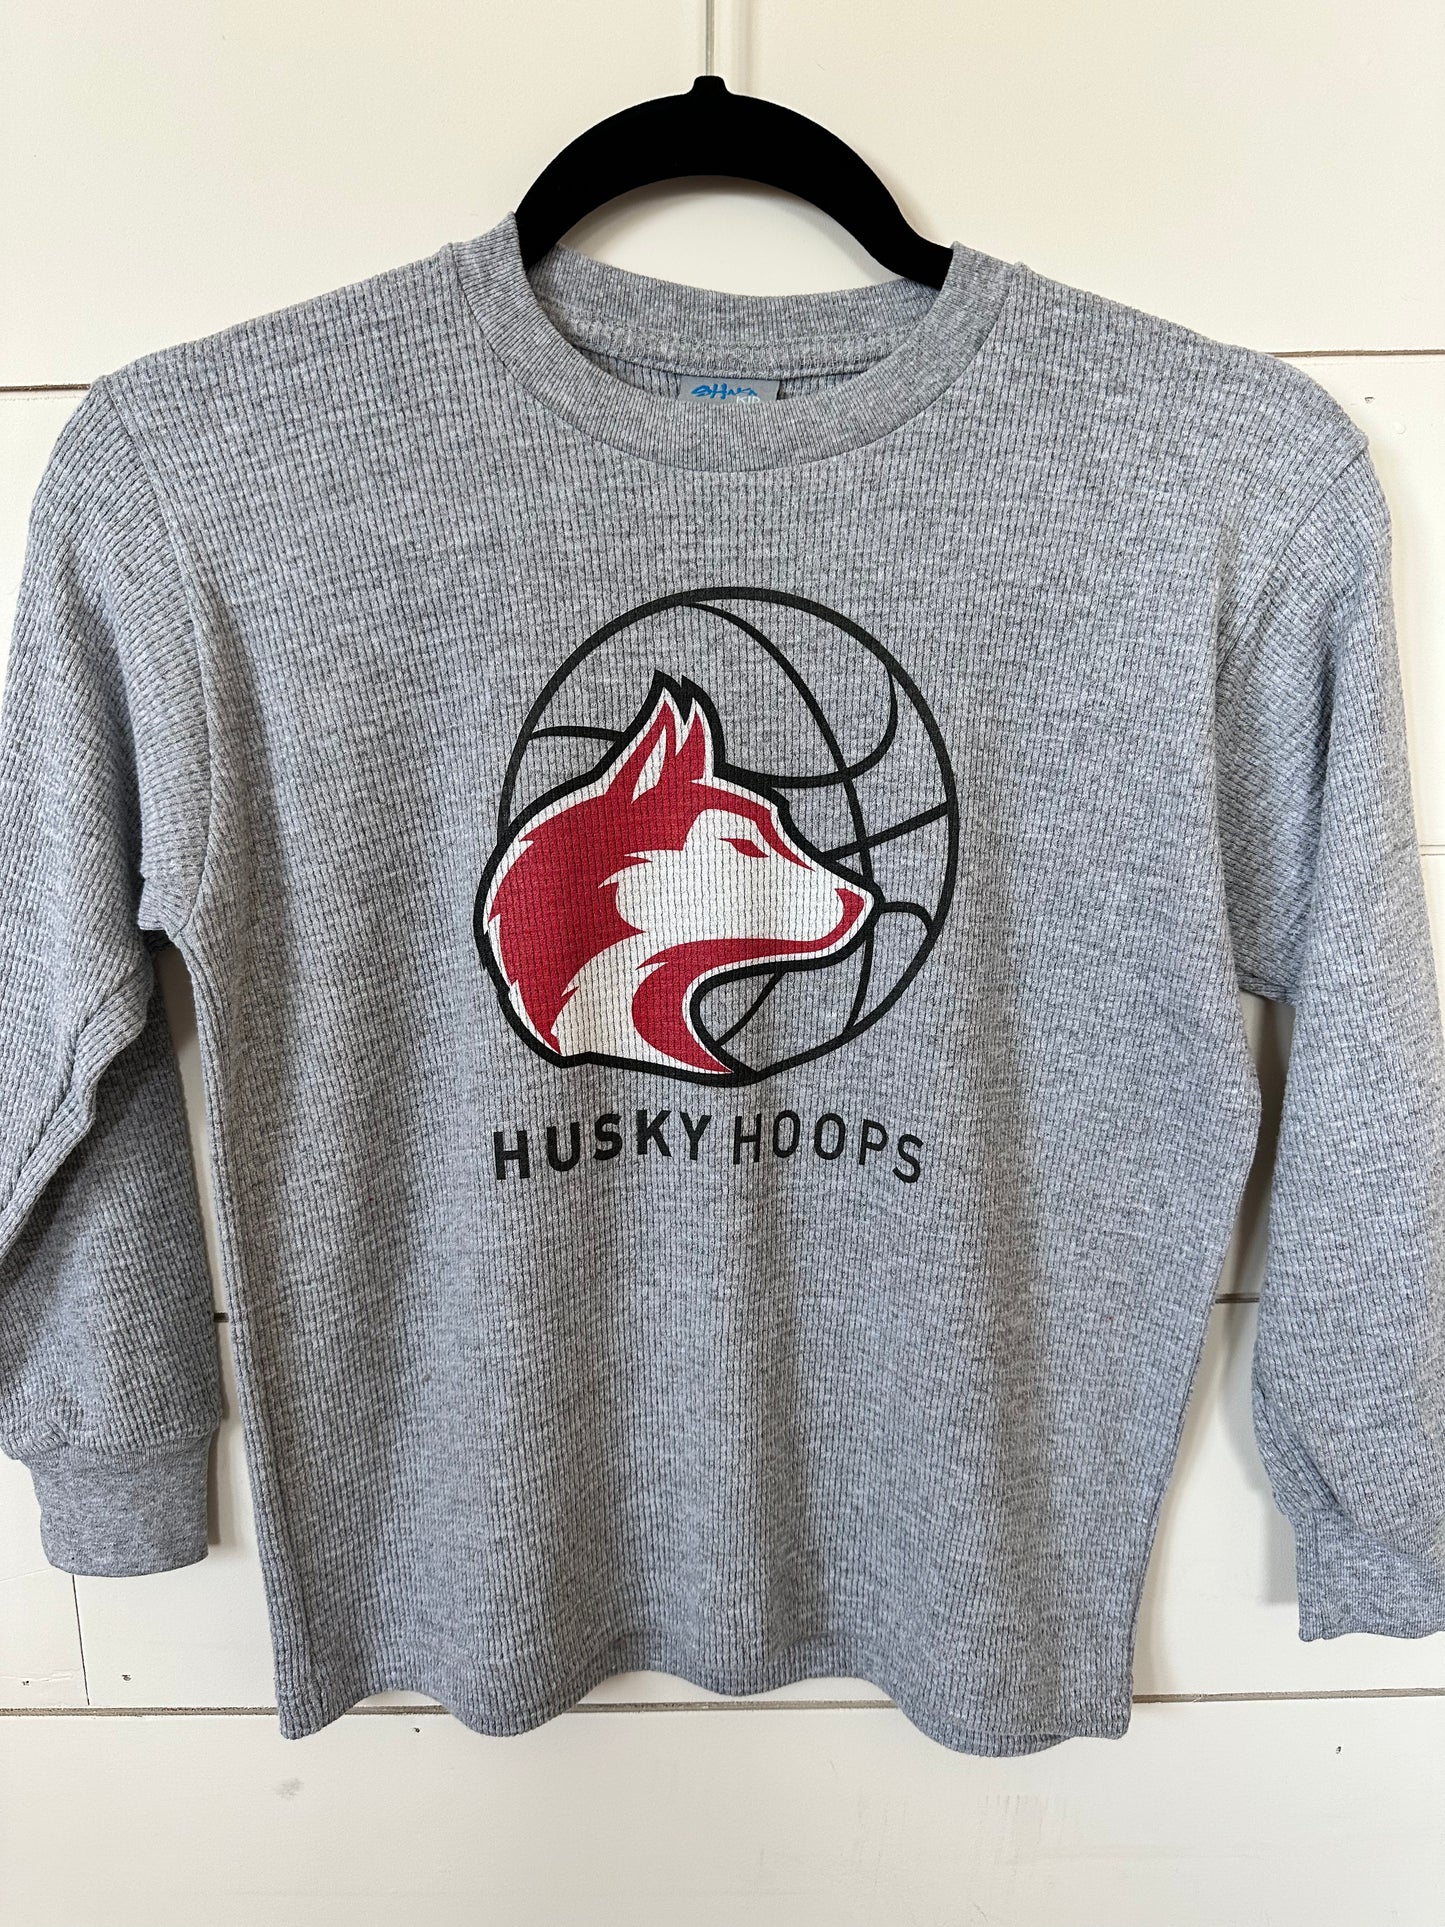 Husky Hoops | Kids Thermal | RTS-Sister Shirts-Sister Shirts, Cute & Custom Tees for Mama & Littles in Trussville, Alabama.